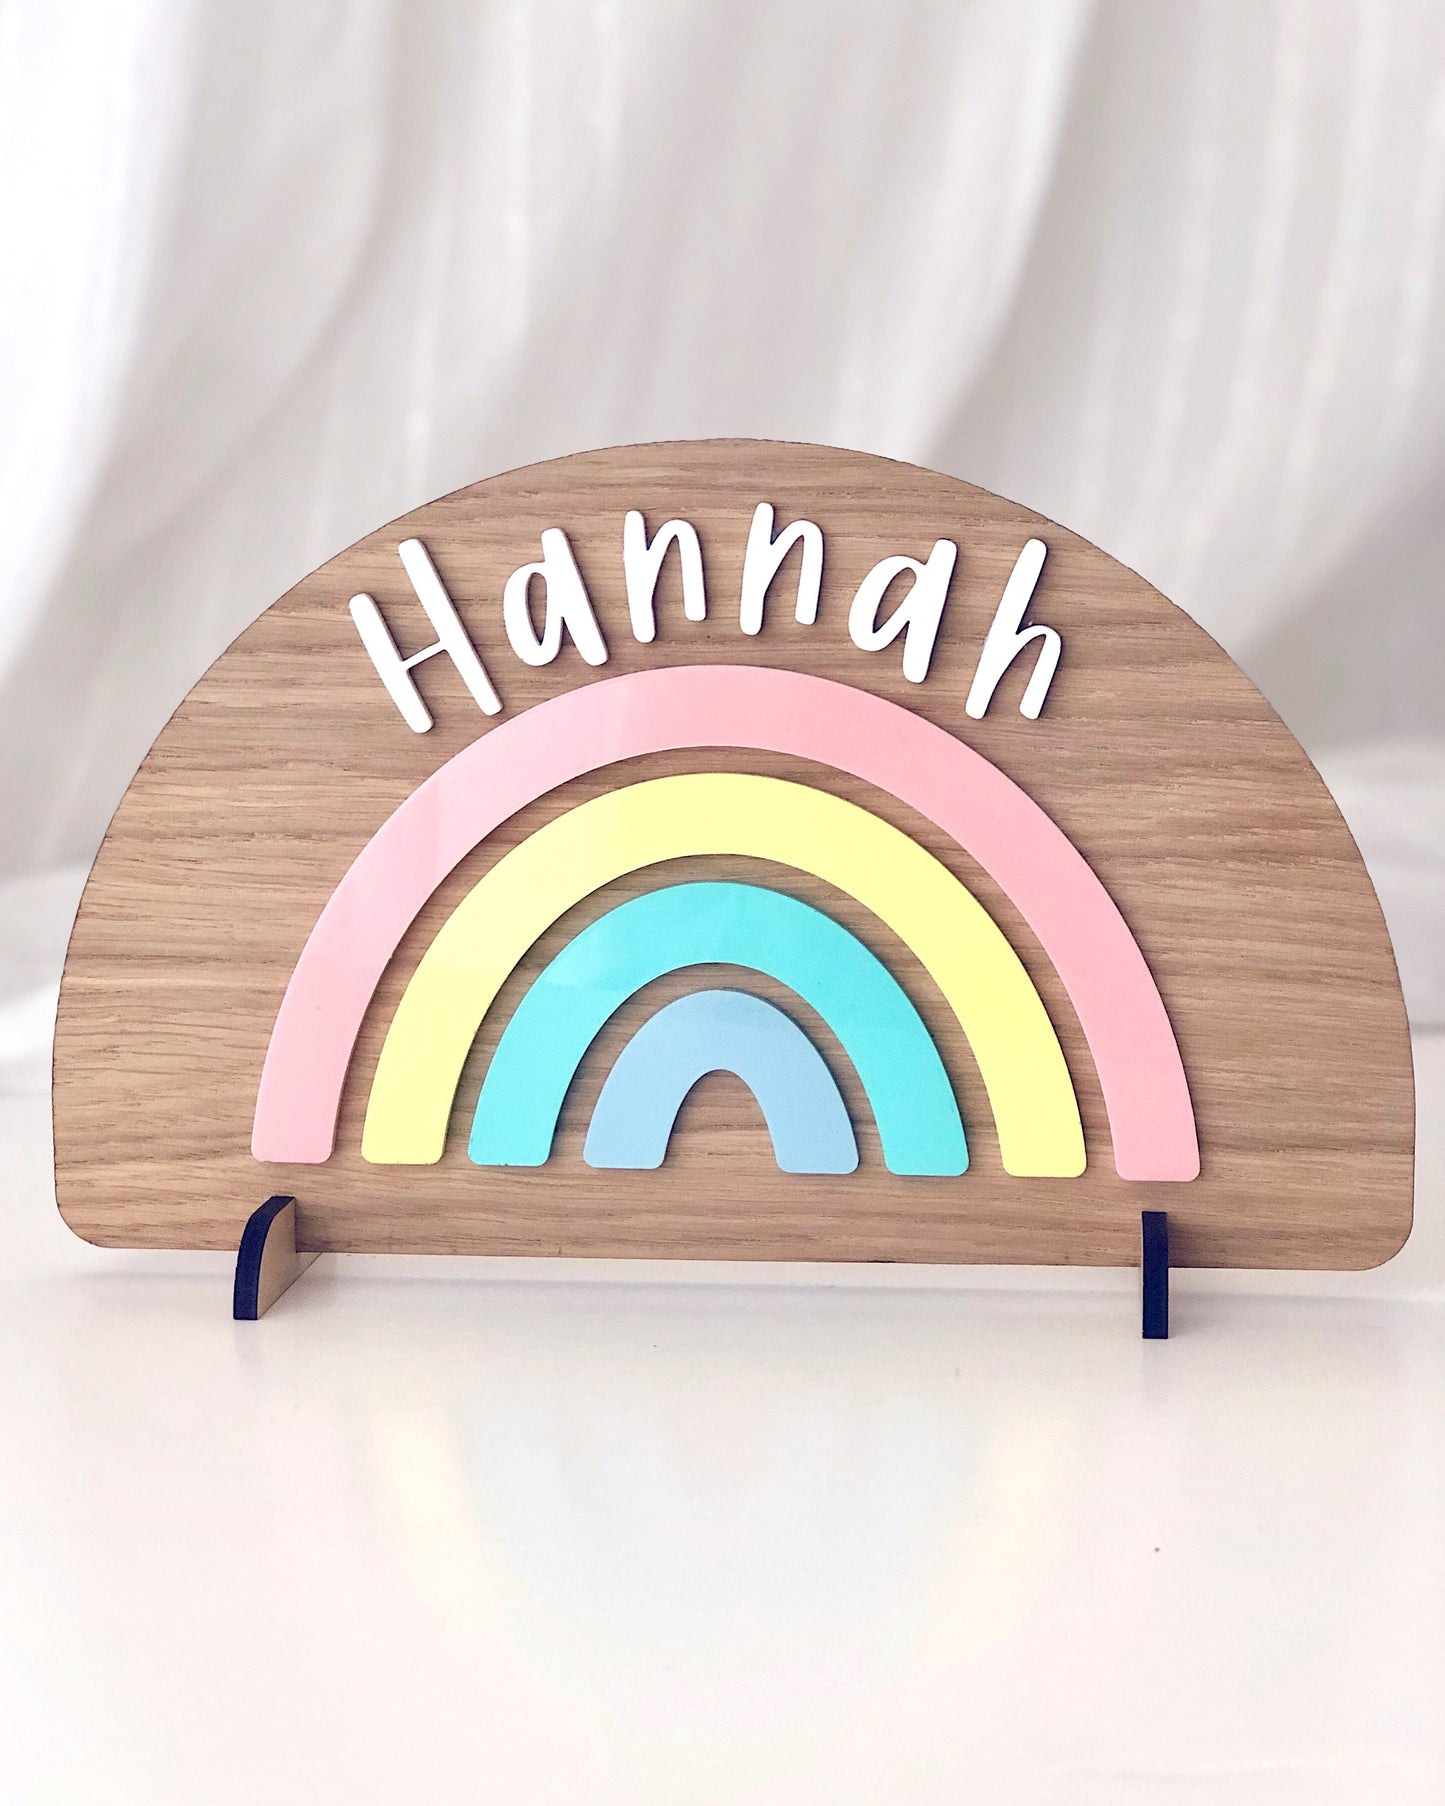 Freestanding wooden rainbow with colourful pastel acrylic details